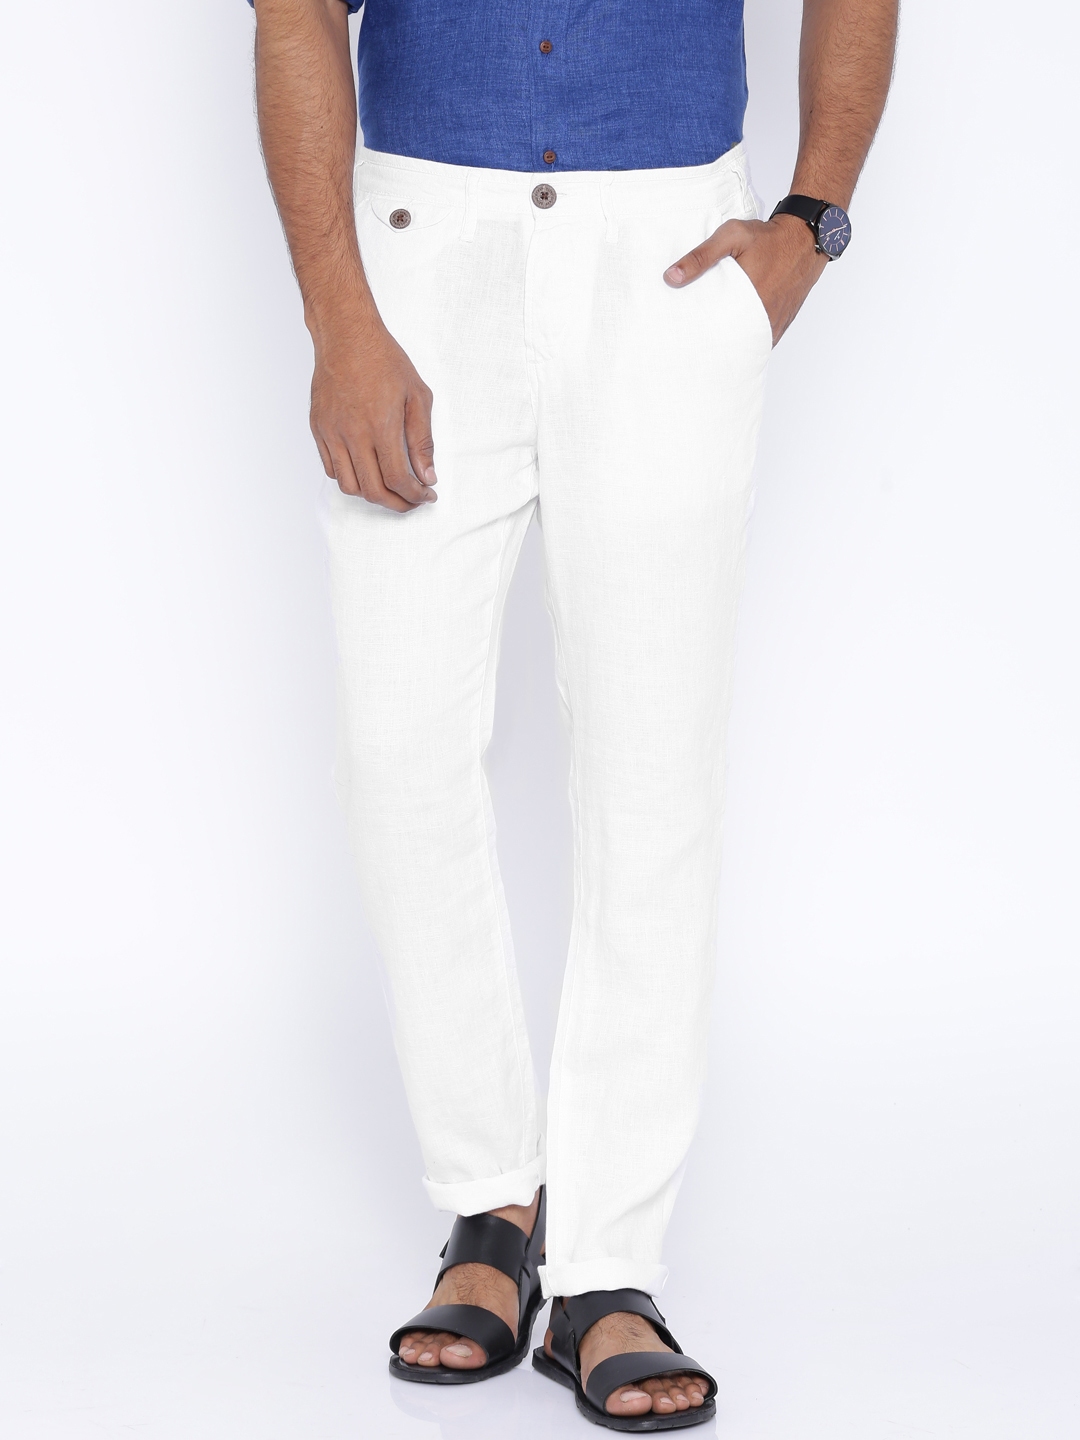 Buy Gap Linen Blend Pleated Trousers from the Gap online shop